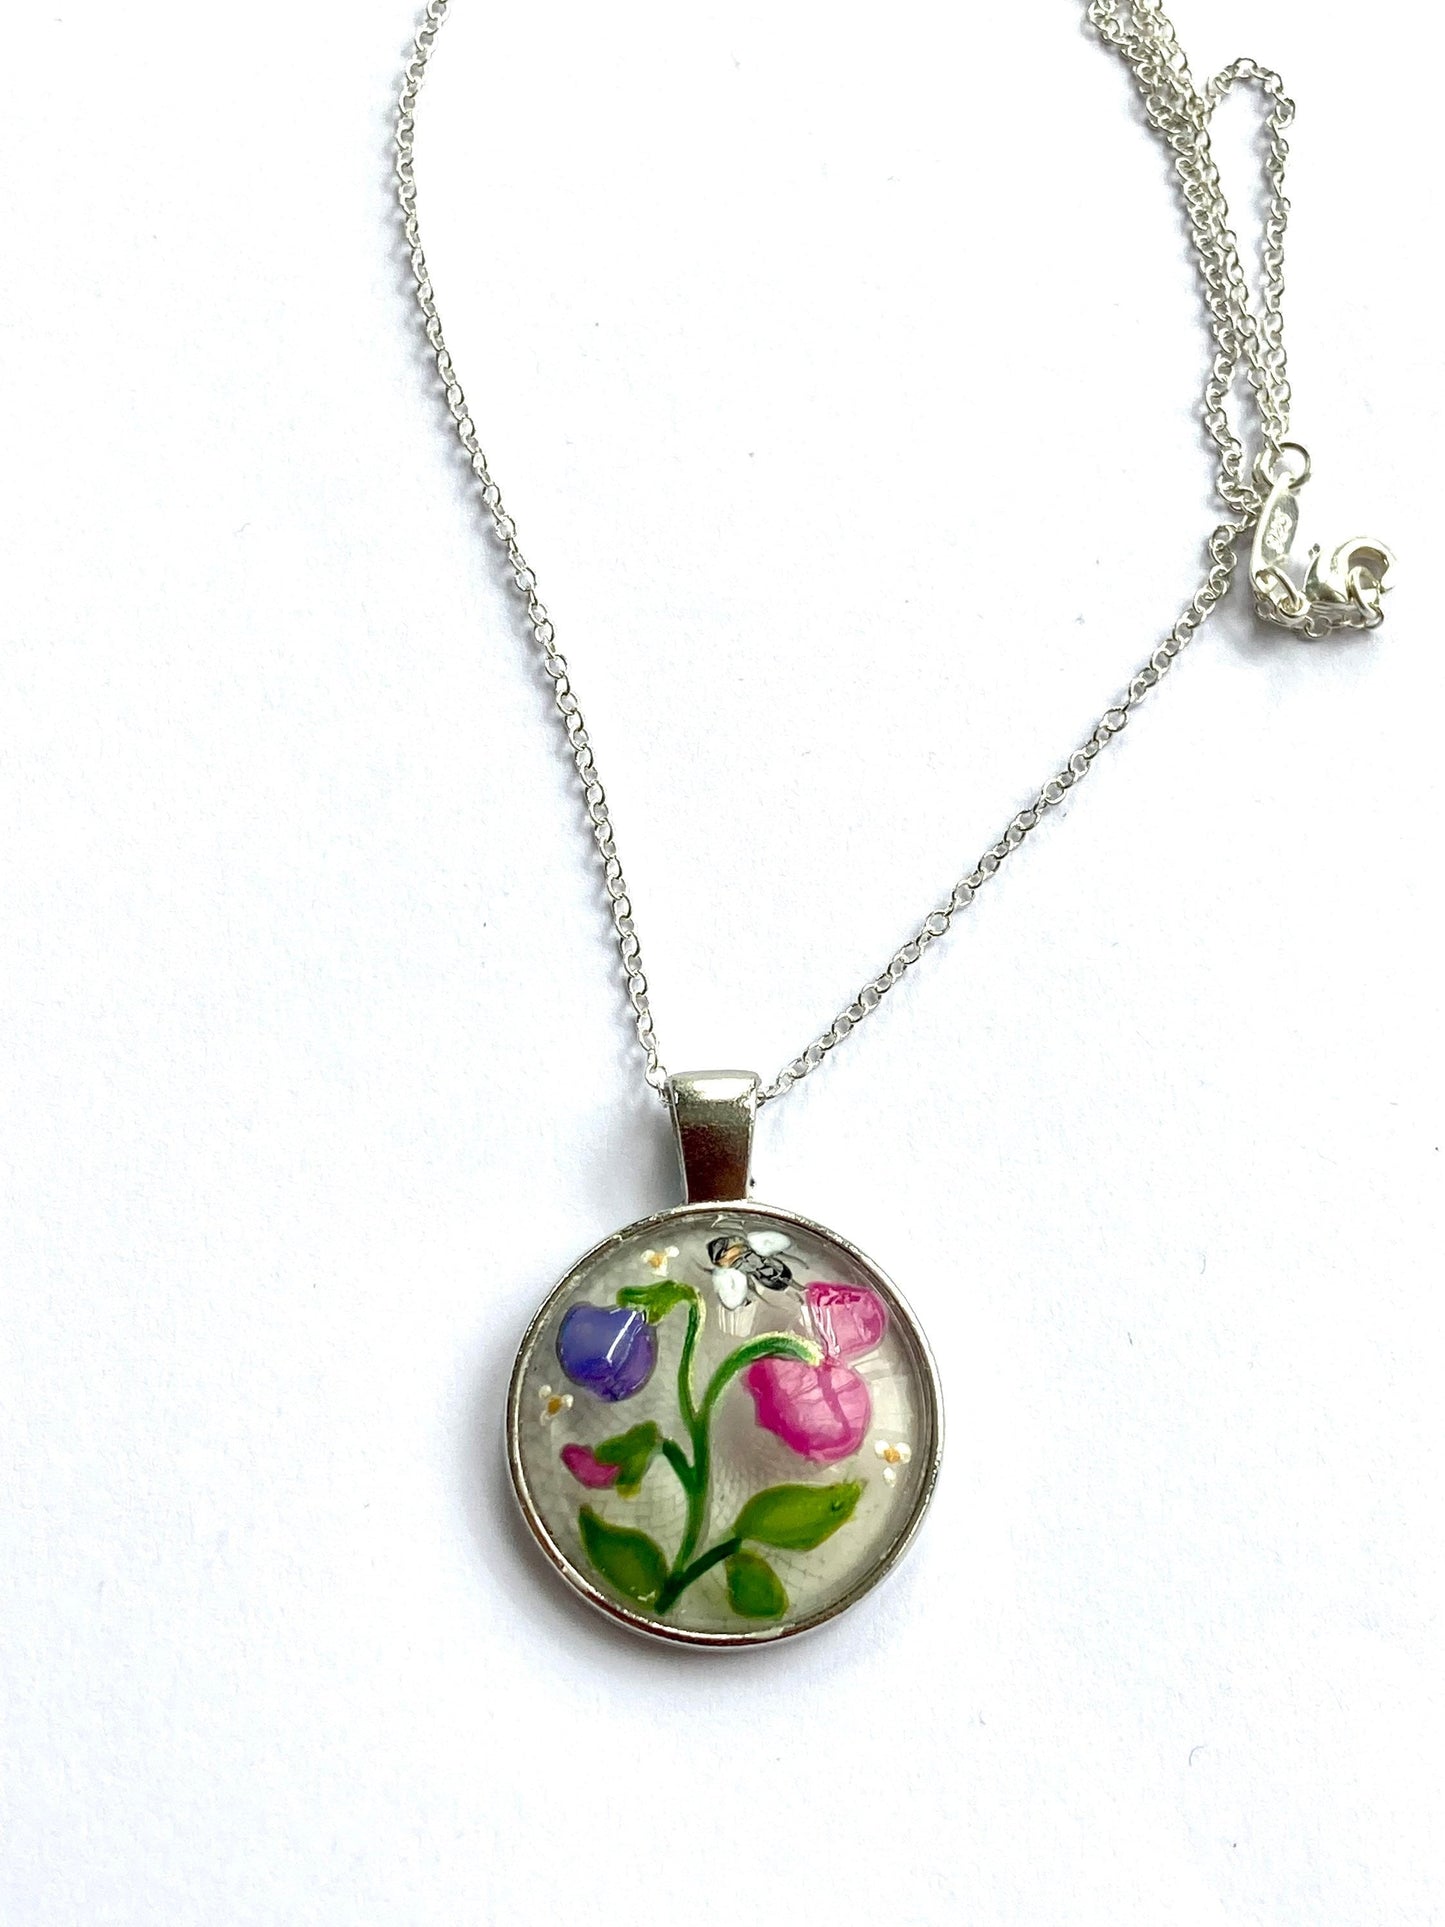 Sweet Pea and Bee hand painted glass pendant necklace